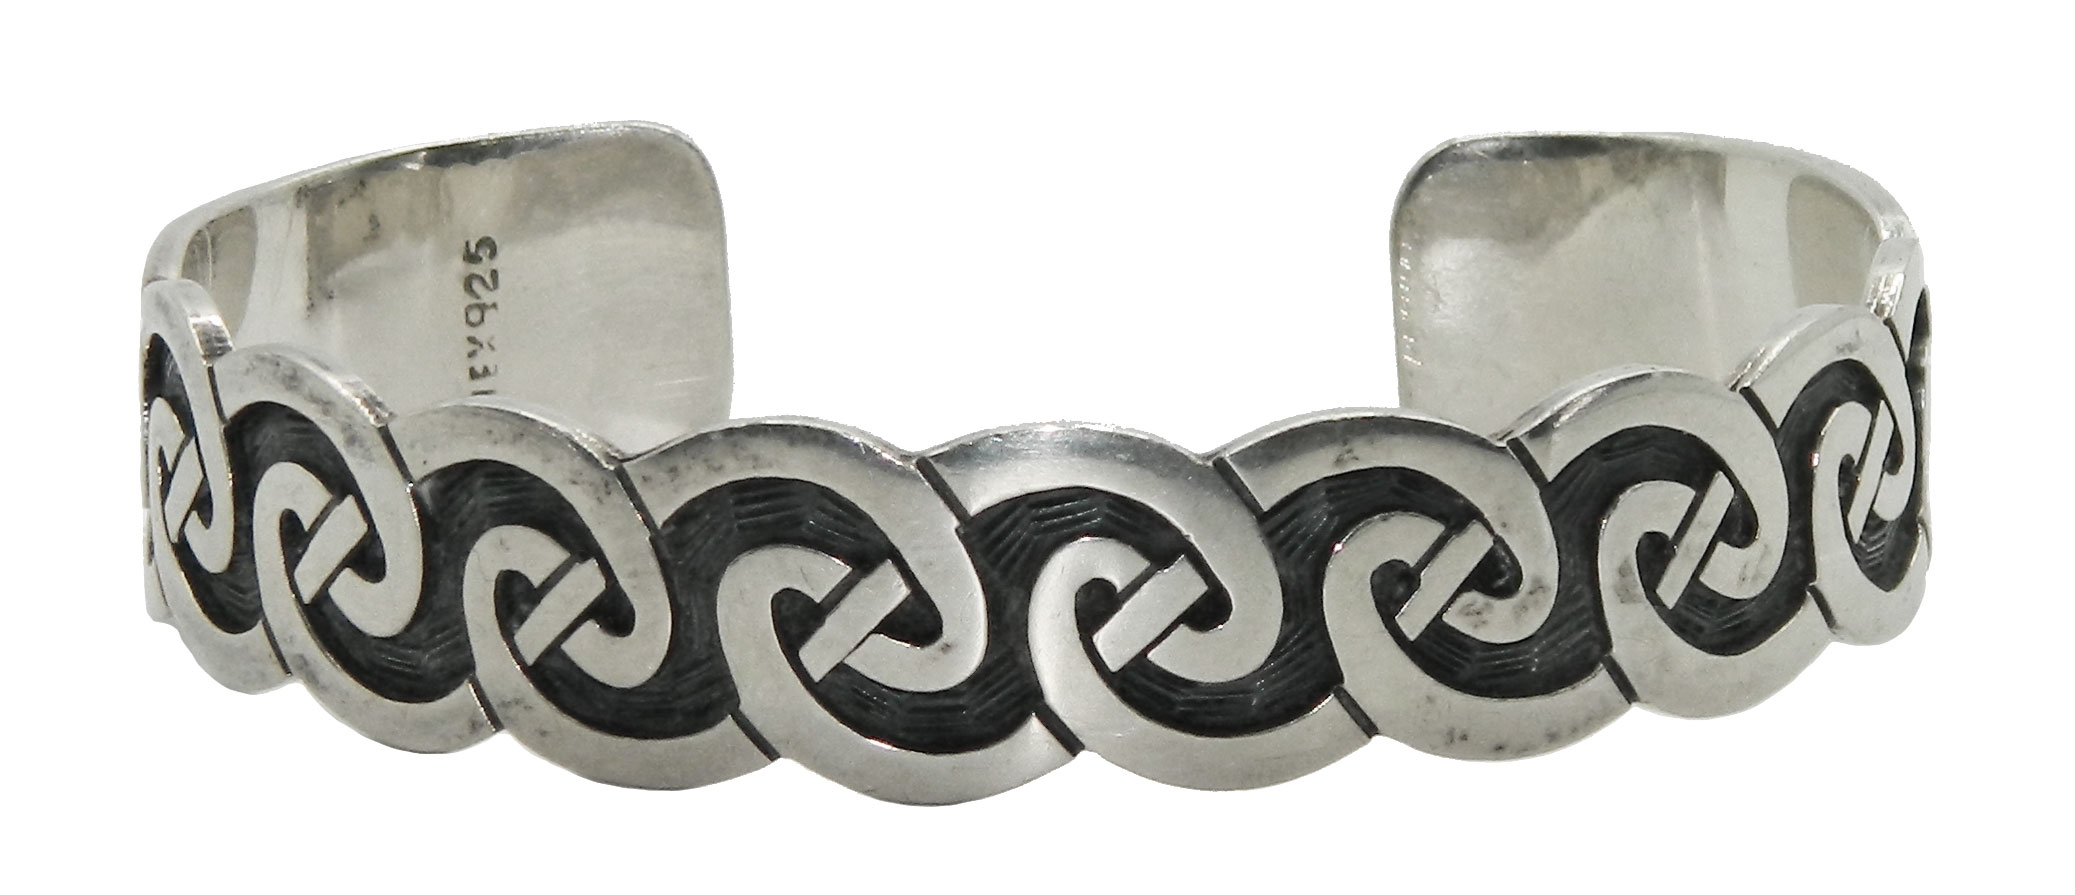 Celtic style Mexican silver cuff bracelet